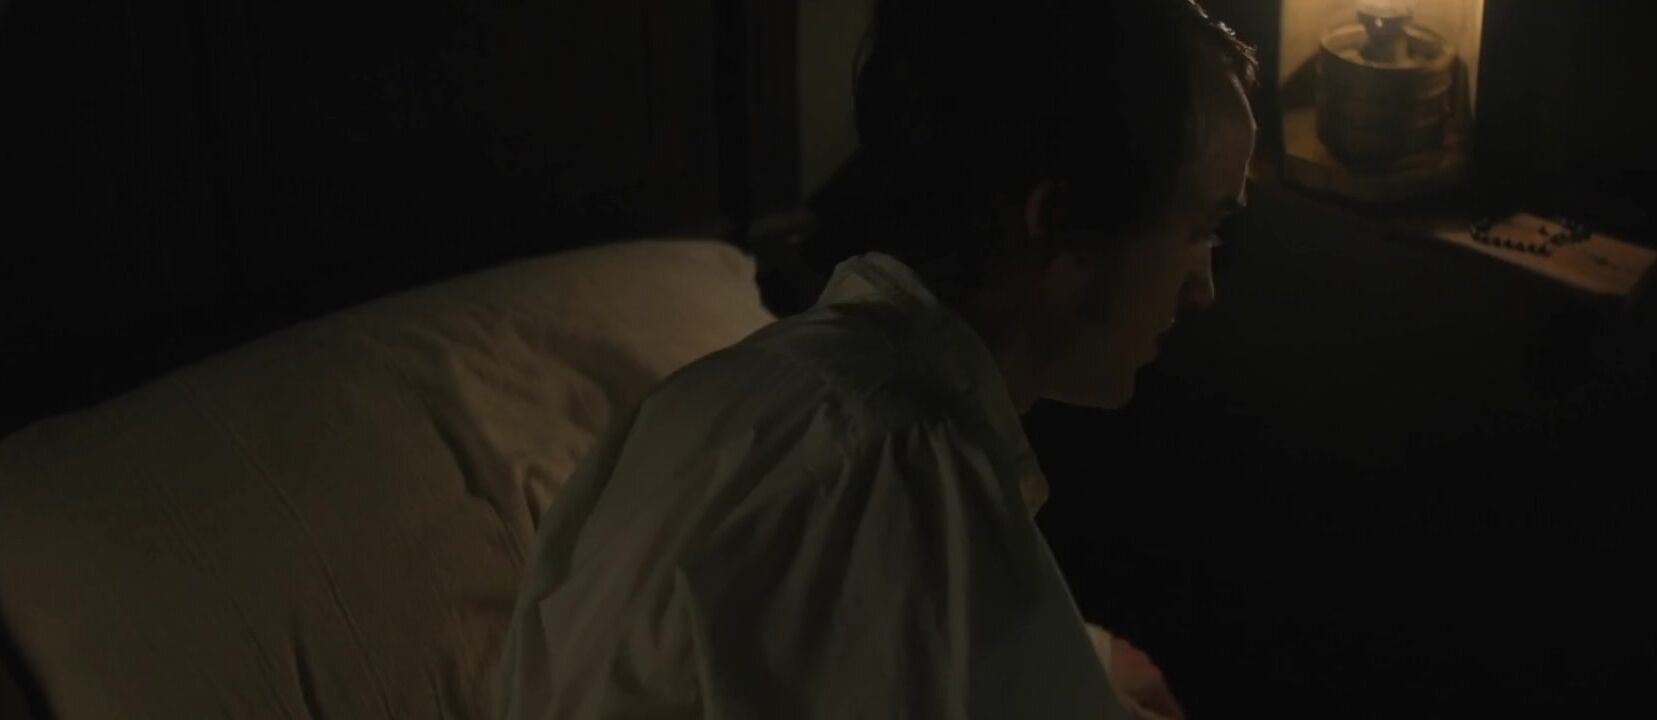 Pee In Secret scene where man with long hair makes it with Elizabeth Olsen and she cums (2013) Roolons - 2